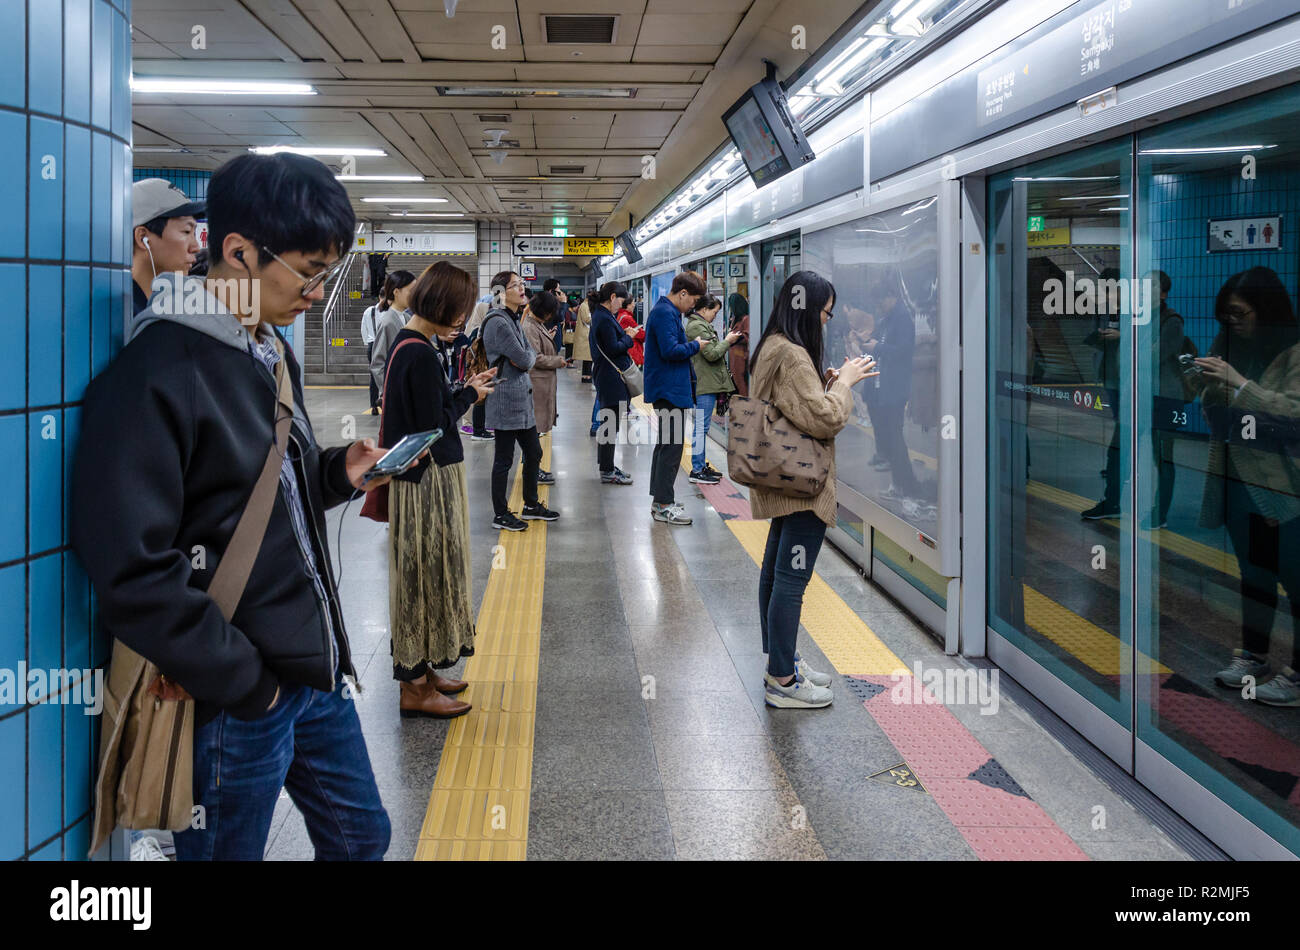 Passengers line up orderly, play on mobile phones and wait for a train on the platform at Samgakji Metro Station in Seoul, South Korea. Stock Photo